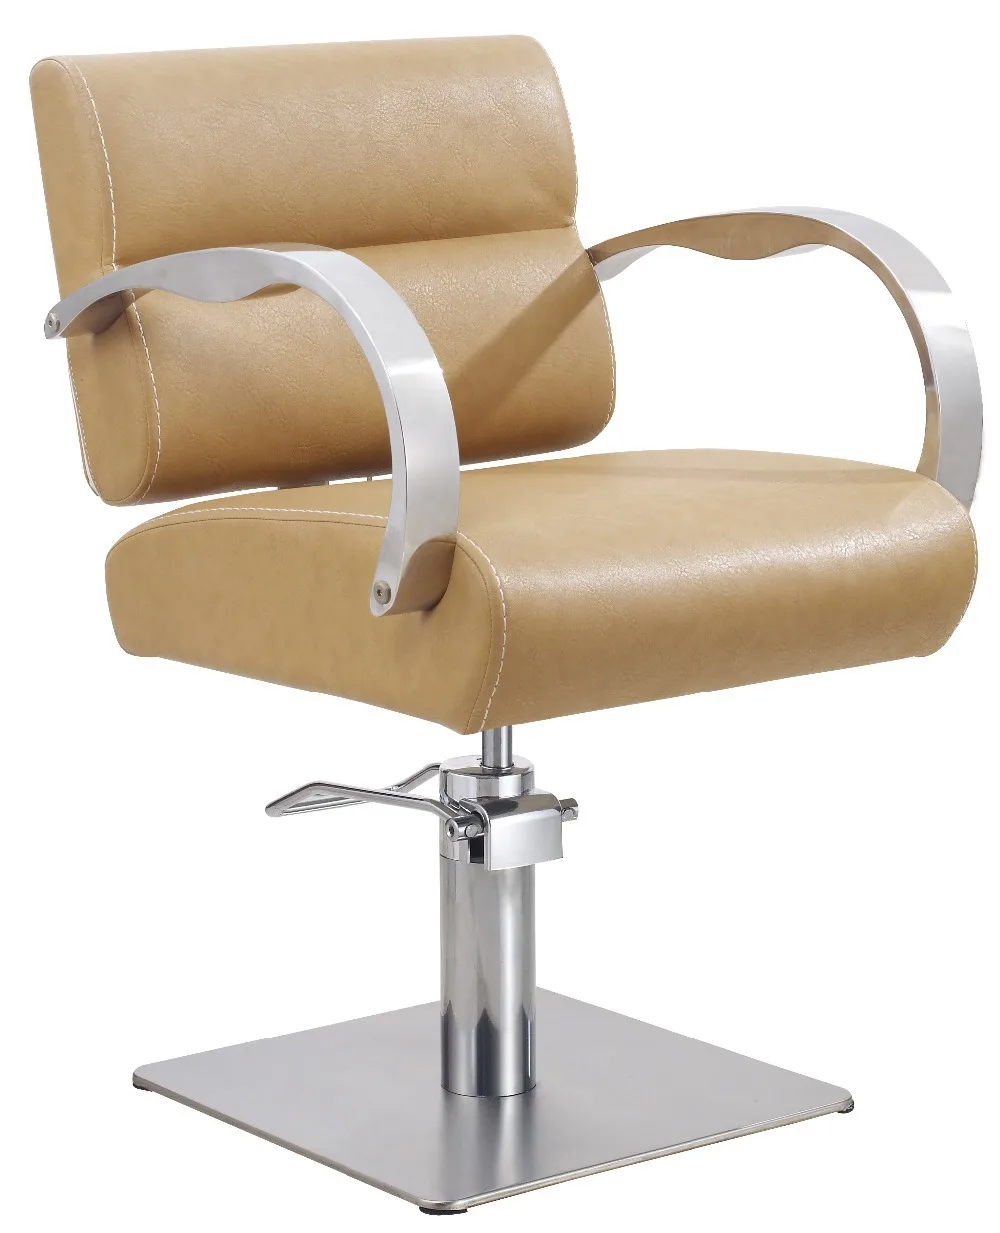 Styling Chair Salon Chair Used Hair Styling Chairs Sale View